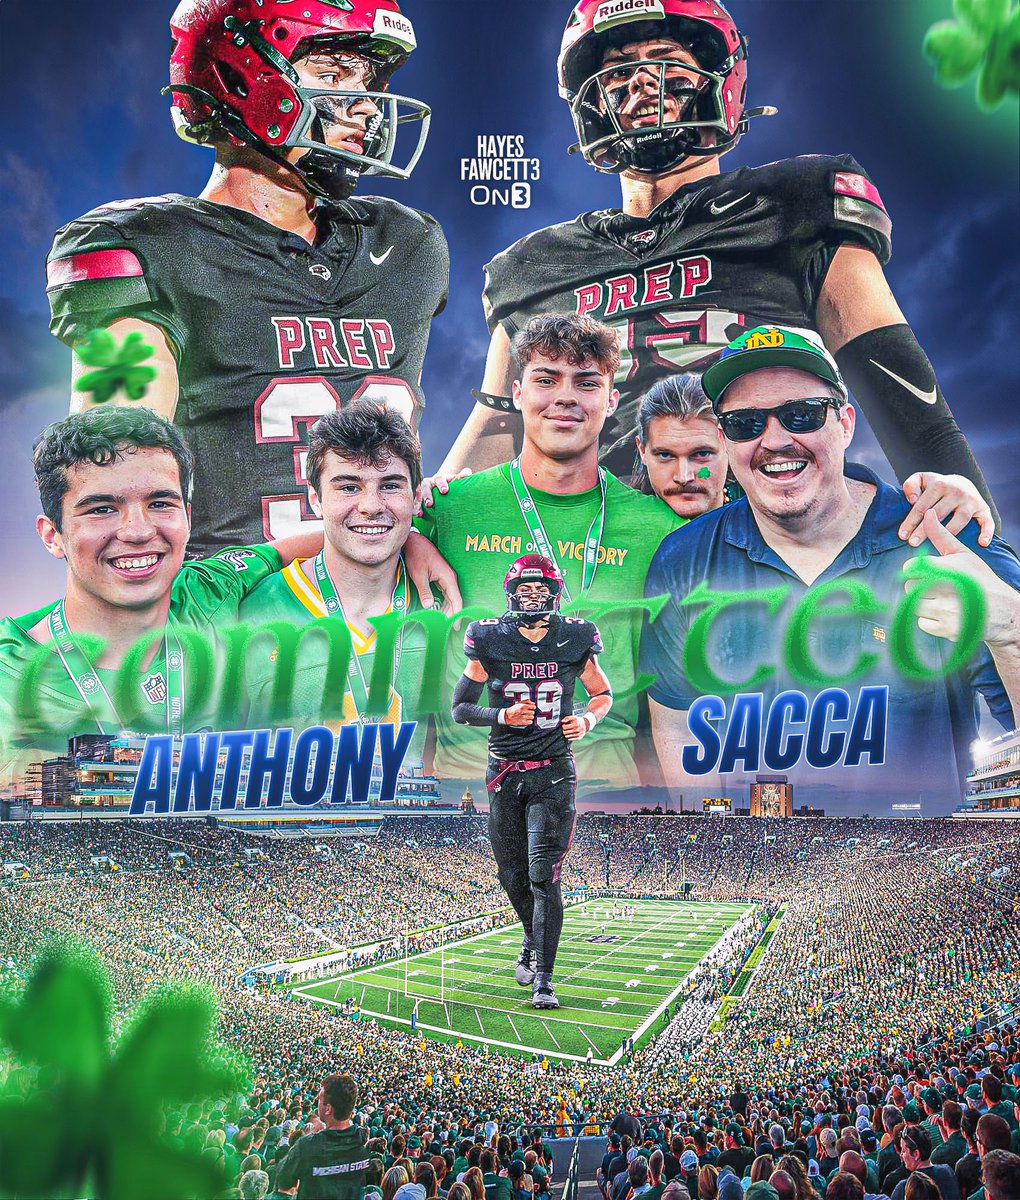 BREAKING: Four-Star LB Anthony Sacca has Committed to Notre Dame, he tells me for @on3recruits The 6’4 230 LB from Delran, NJ chose the Fighting Irish over Alabama and Ohio State “Go Irish ☘️” on3.com/db/anthony-sac…